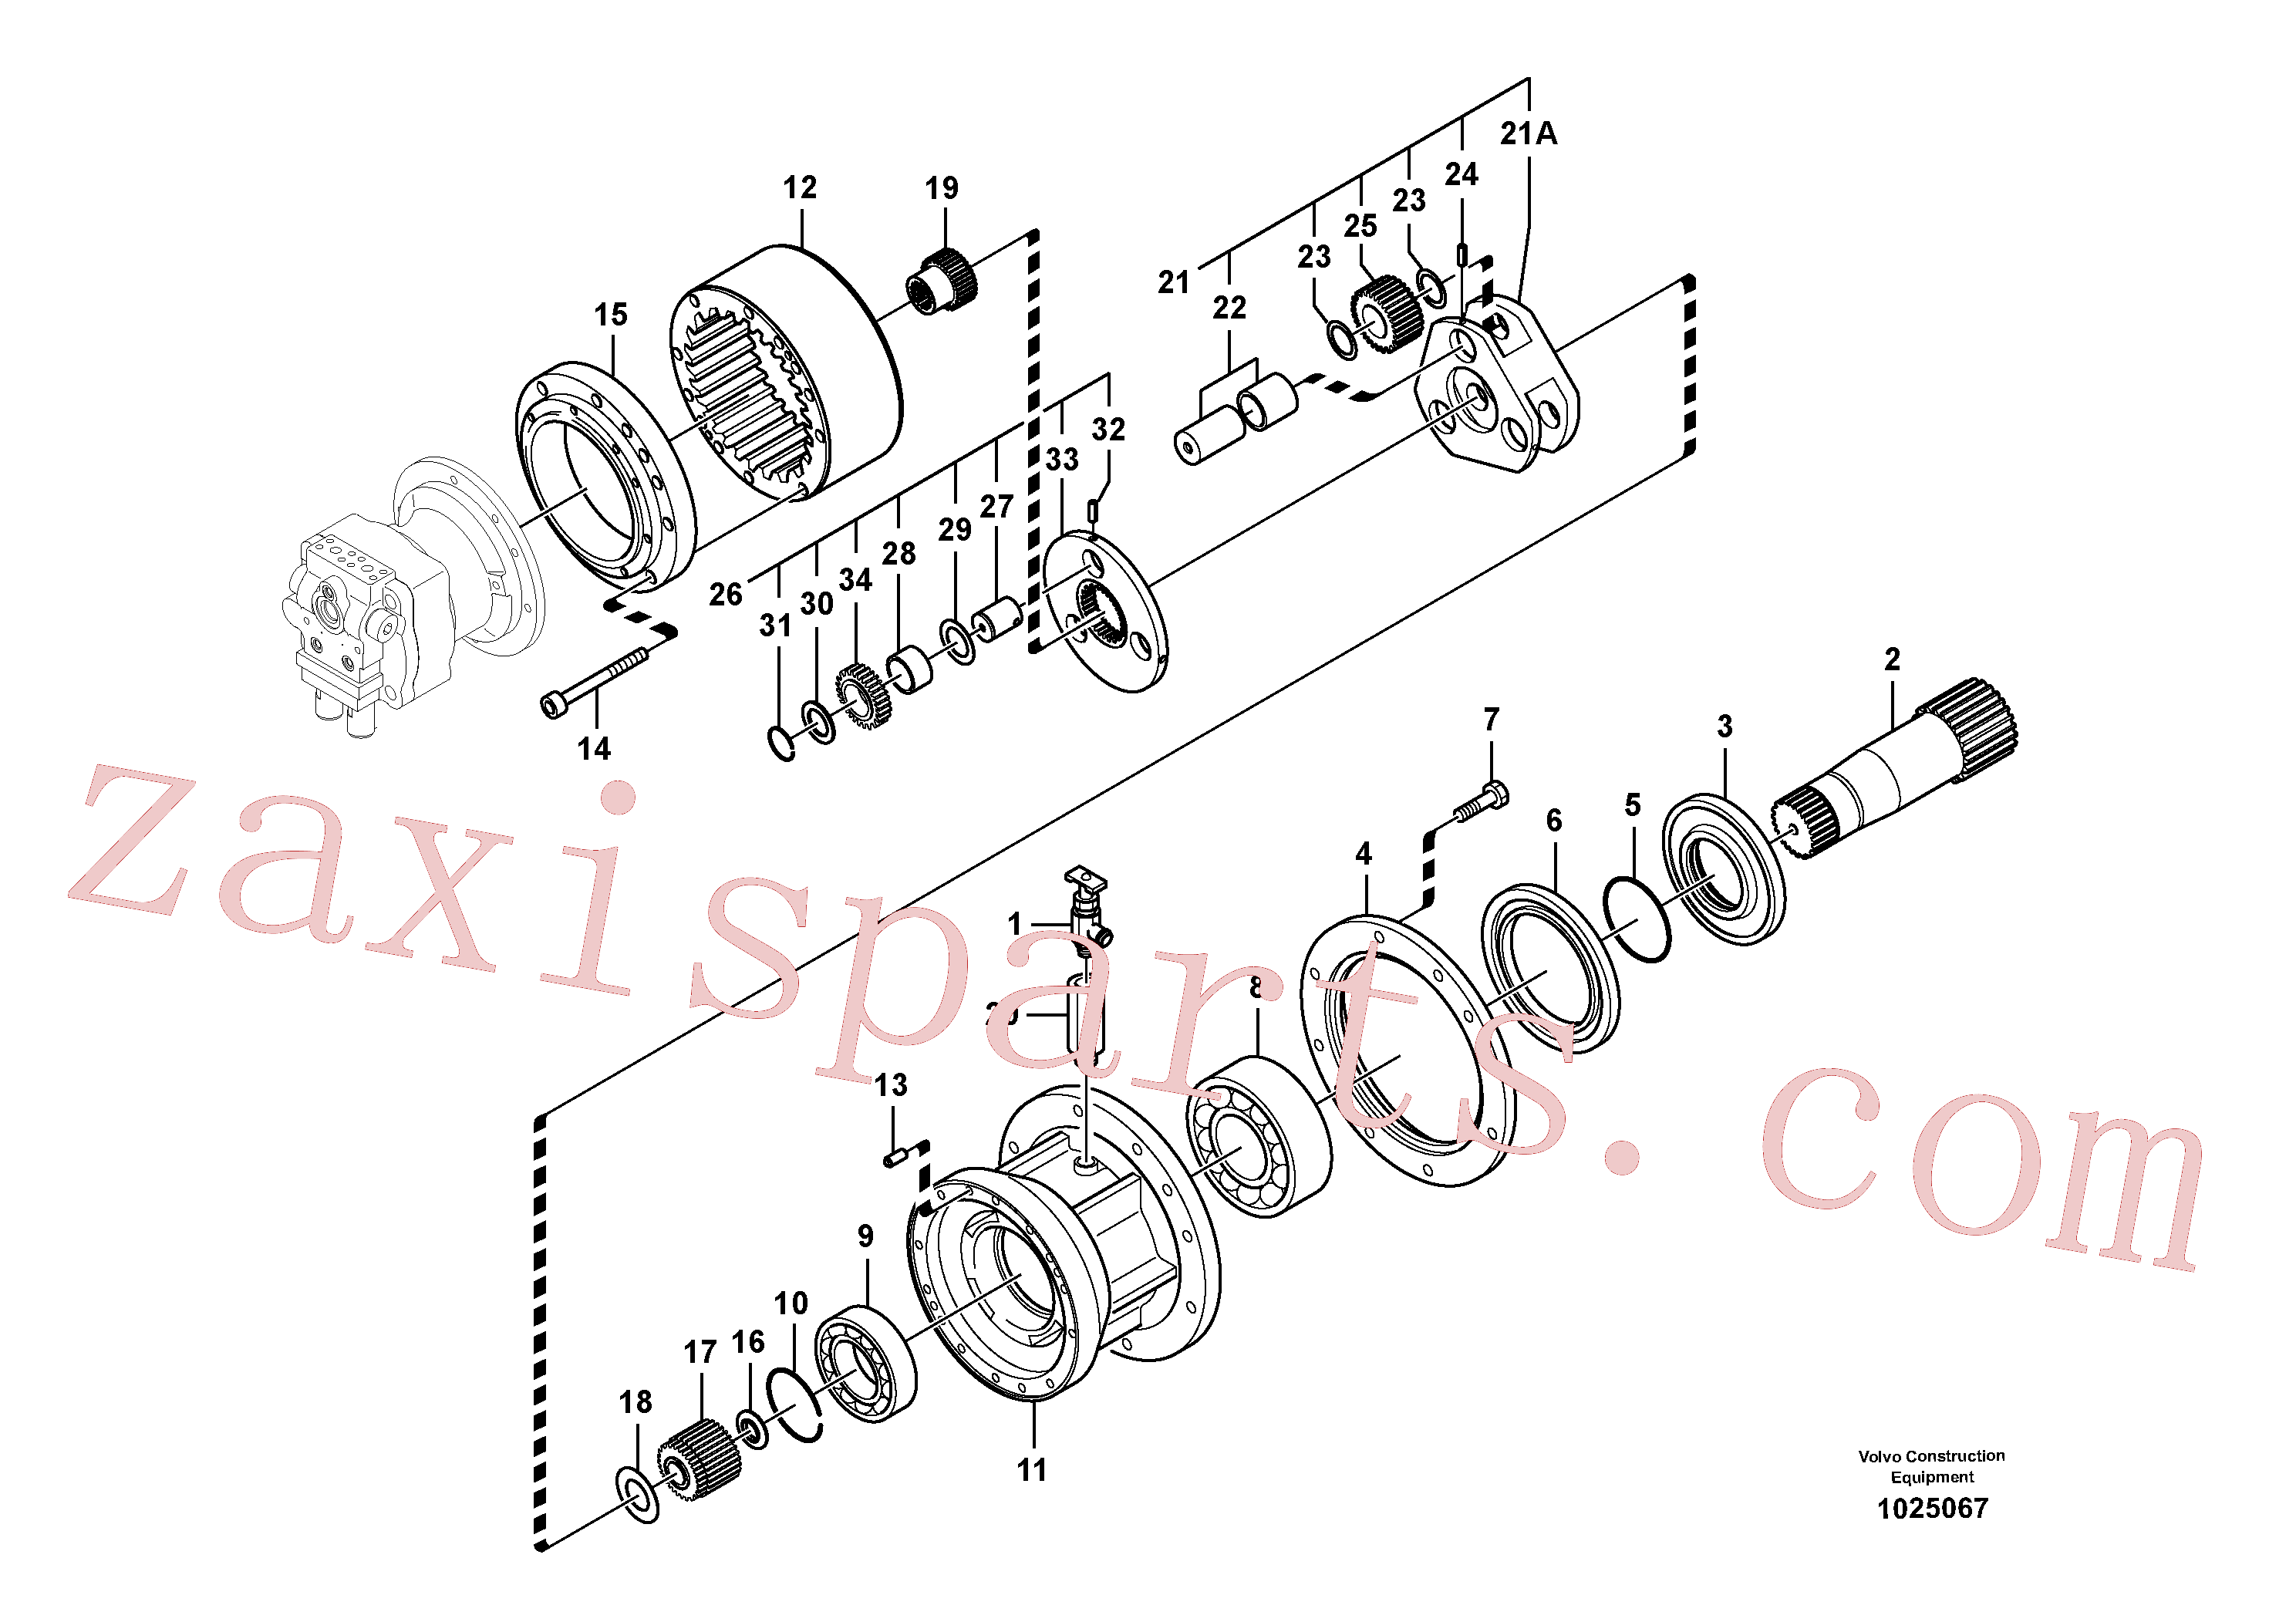 SA7118-30460 for Volvo Swing gearbox(1025067 assembly)